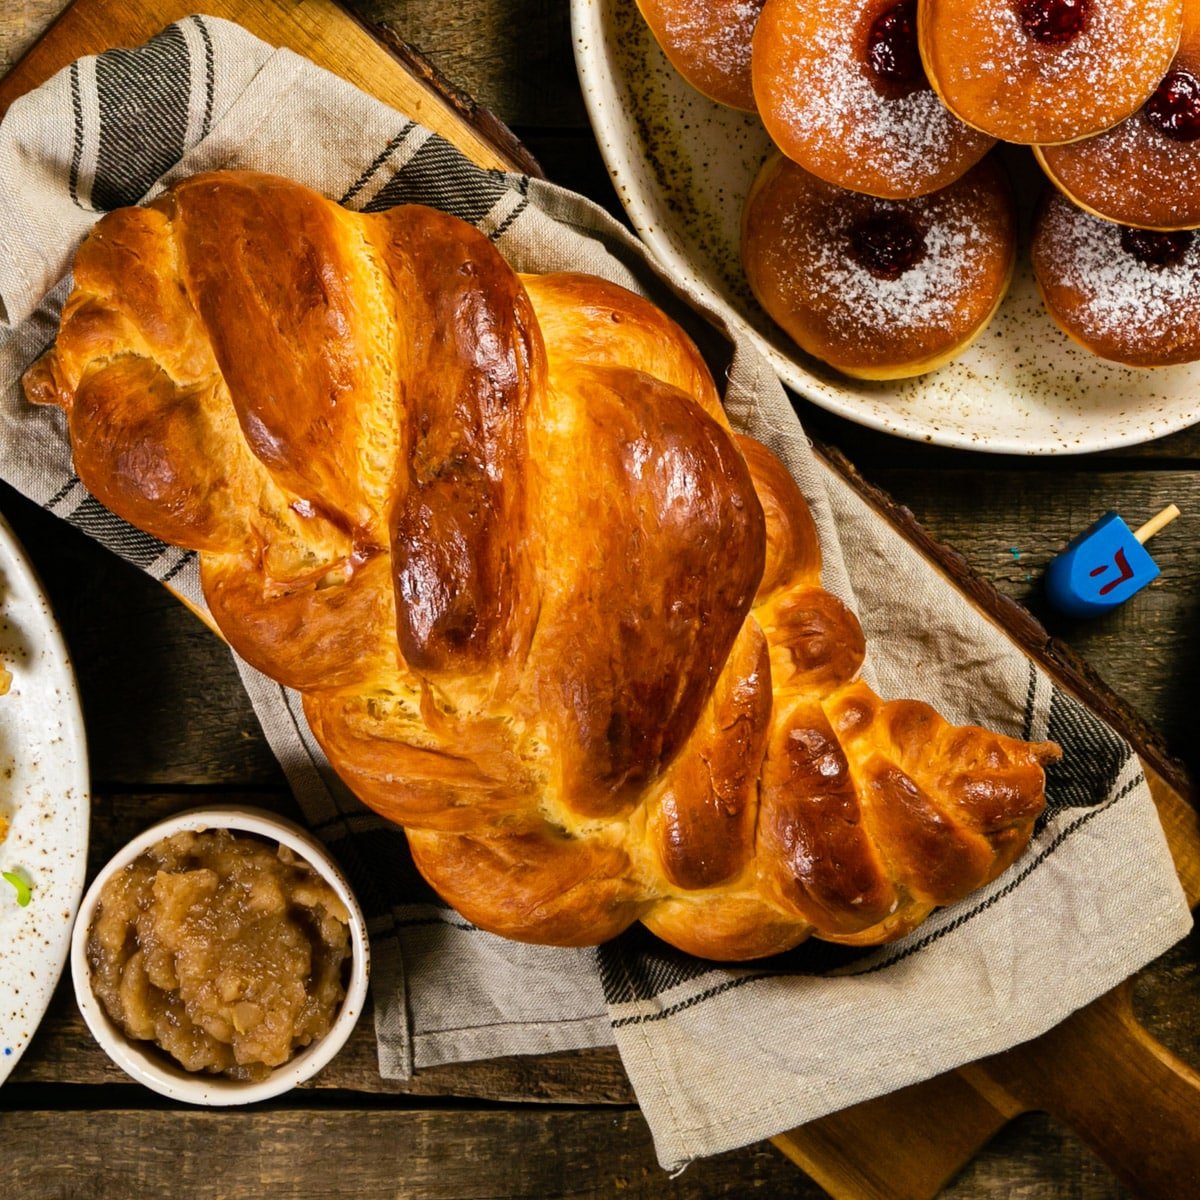 Challah and other Jewish foods on a wooden table.